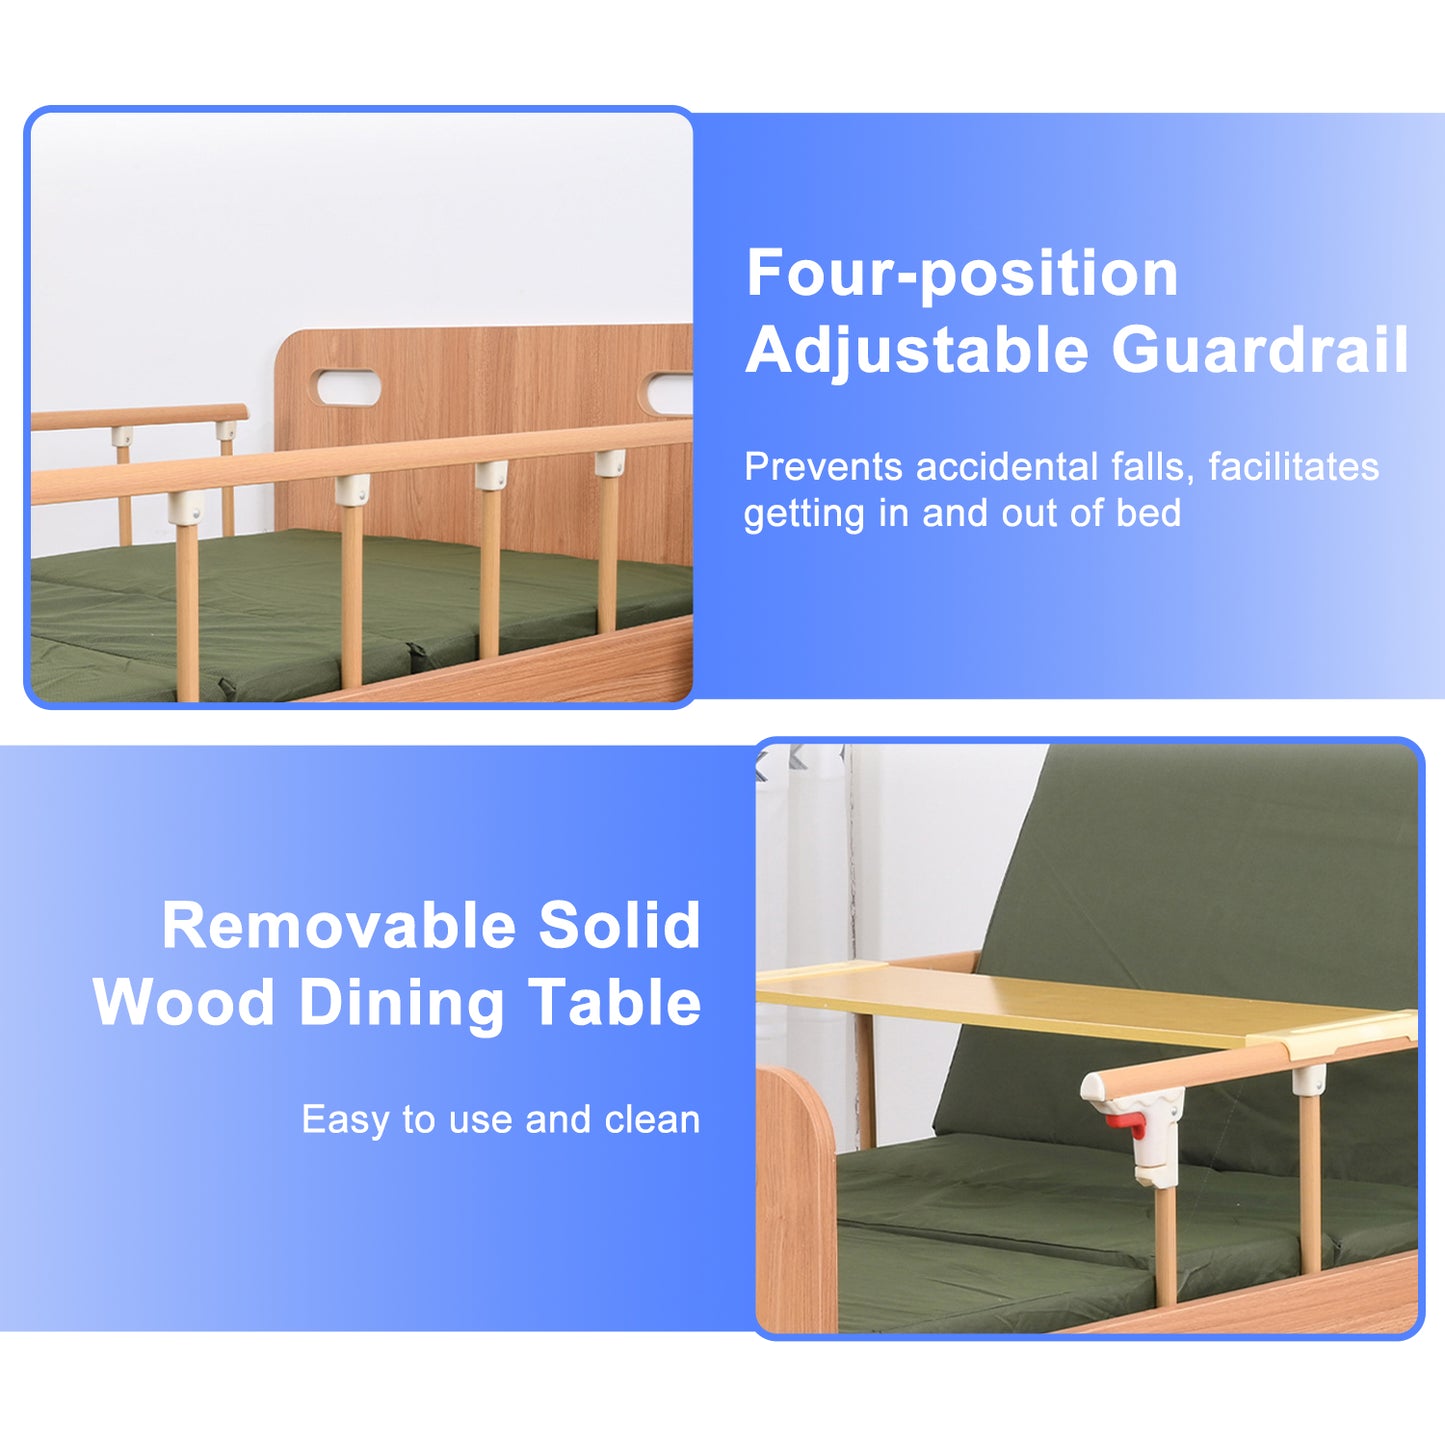 Wooden Hidden Double Swing Handle Hospital Bed w/ Full-Length Adjustable Guardrails, Wooden Dining Table and 2.36" Mattress